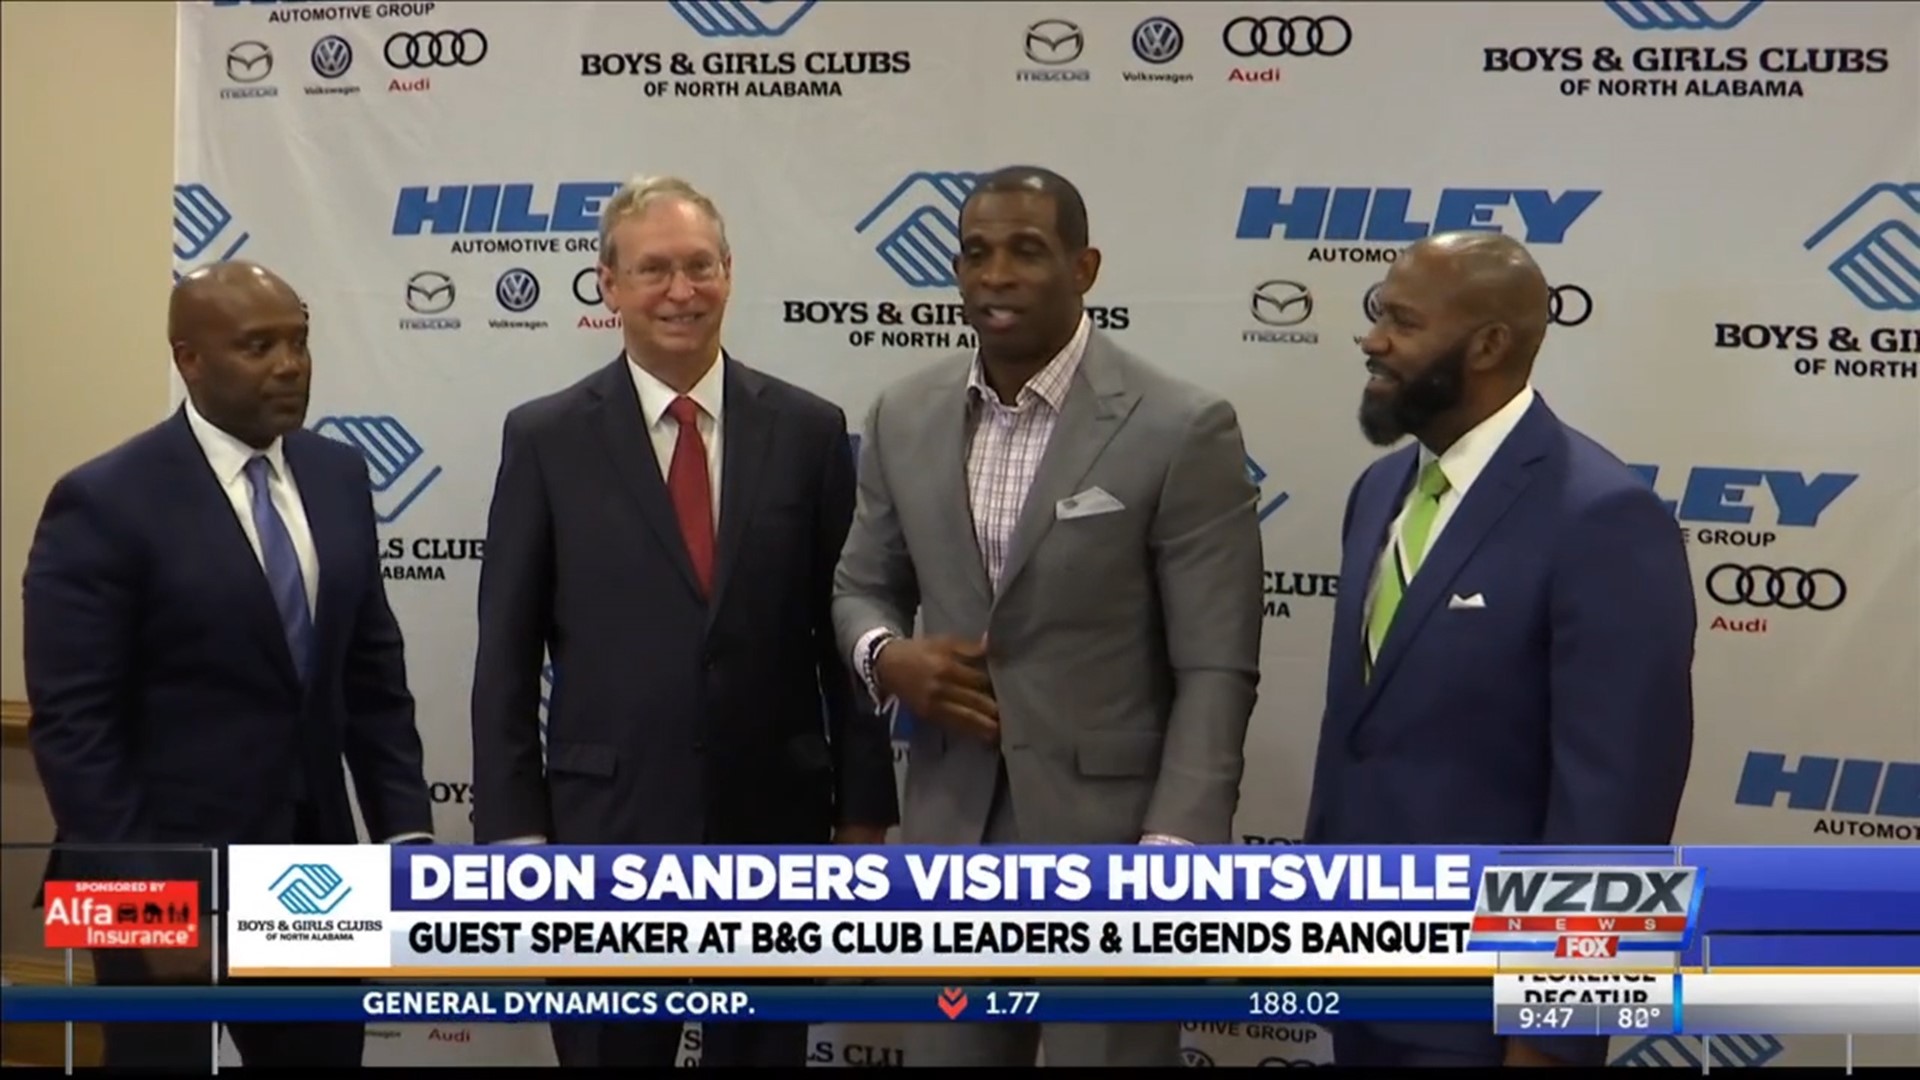 Pro Football Hall of Famer and current Jackson State head football coach Deion Sanders was the keynote speaker at this year's Leaders & Legends Banquet in Huntsville